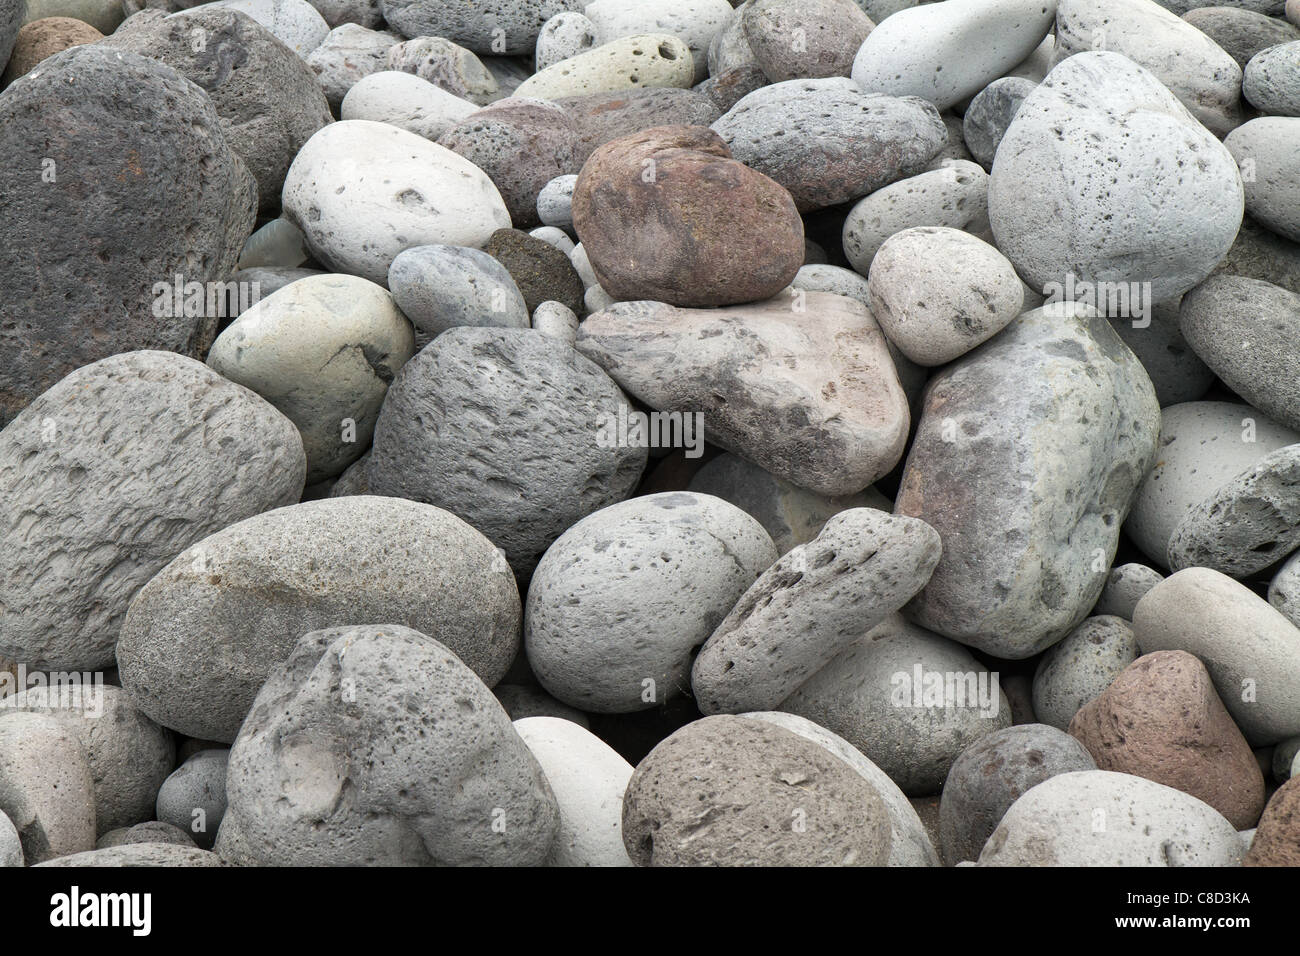 Pile of rounded rocks on the beach at Mosteiros, Azores. Stock Photo